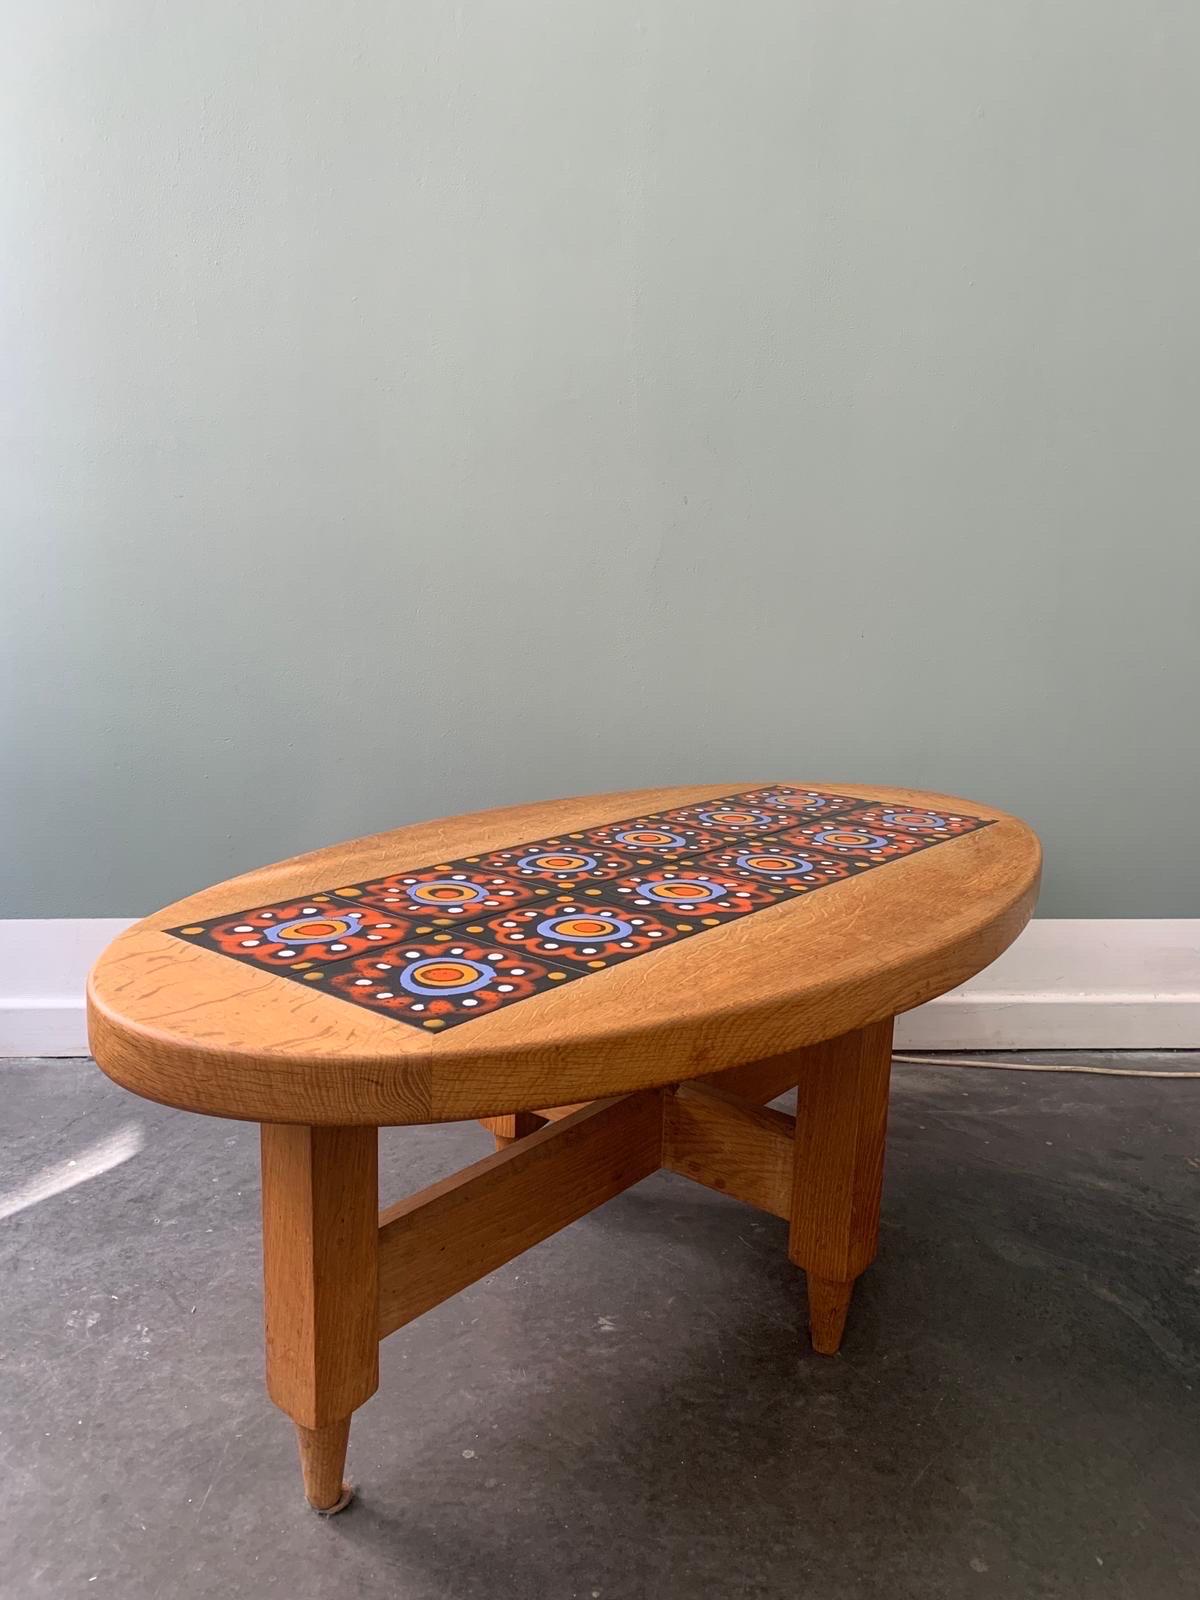 An oval oak and ceramic coffee table by Guillerme et Chambron, Edition Votre Maison
if the colors of the tiles not convenient we can offer others colors